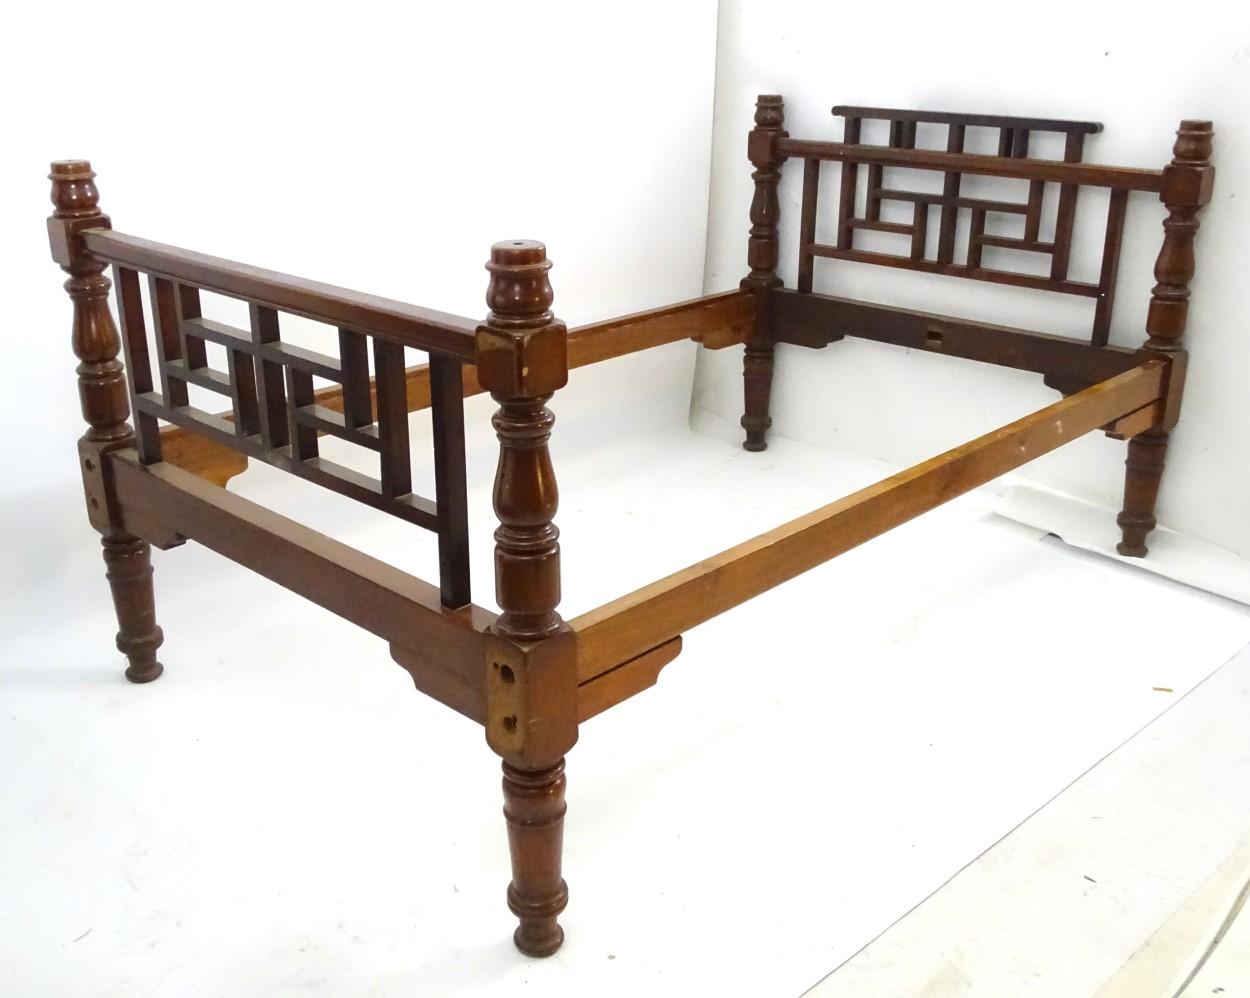 An extremely rare Anglo-Japanese walnut double bed or a four poster bed, in the style of E W Godwin probably made by Collinson and Lock of London.
With higher Lattice work bar to the head board which has curled ends and central lattice work details